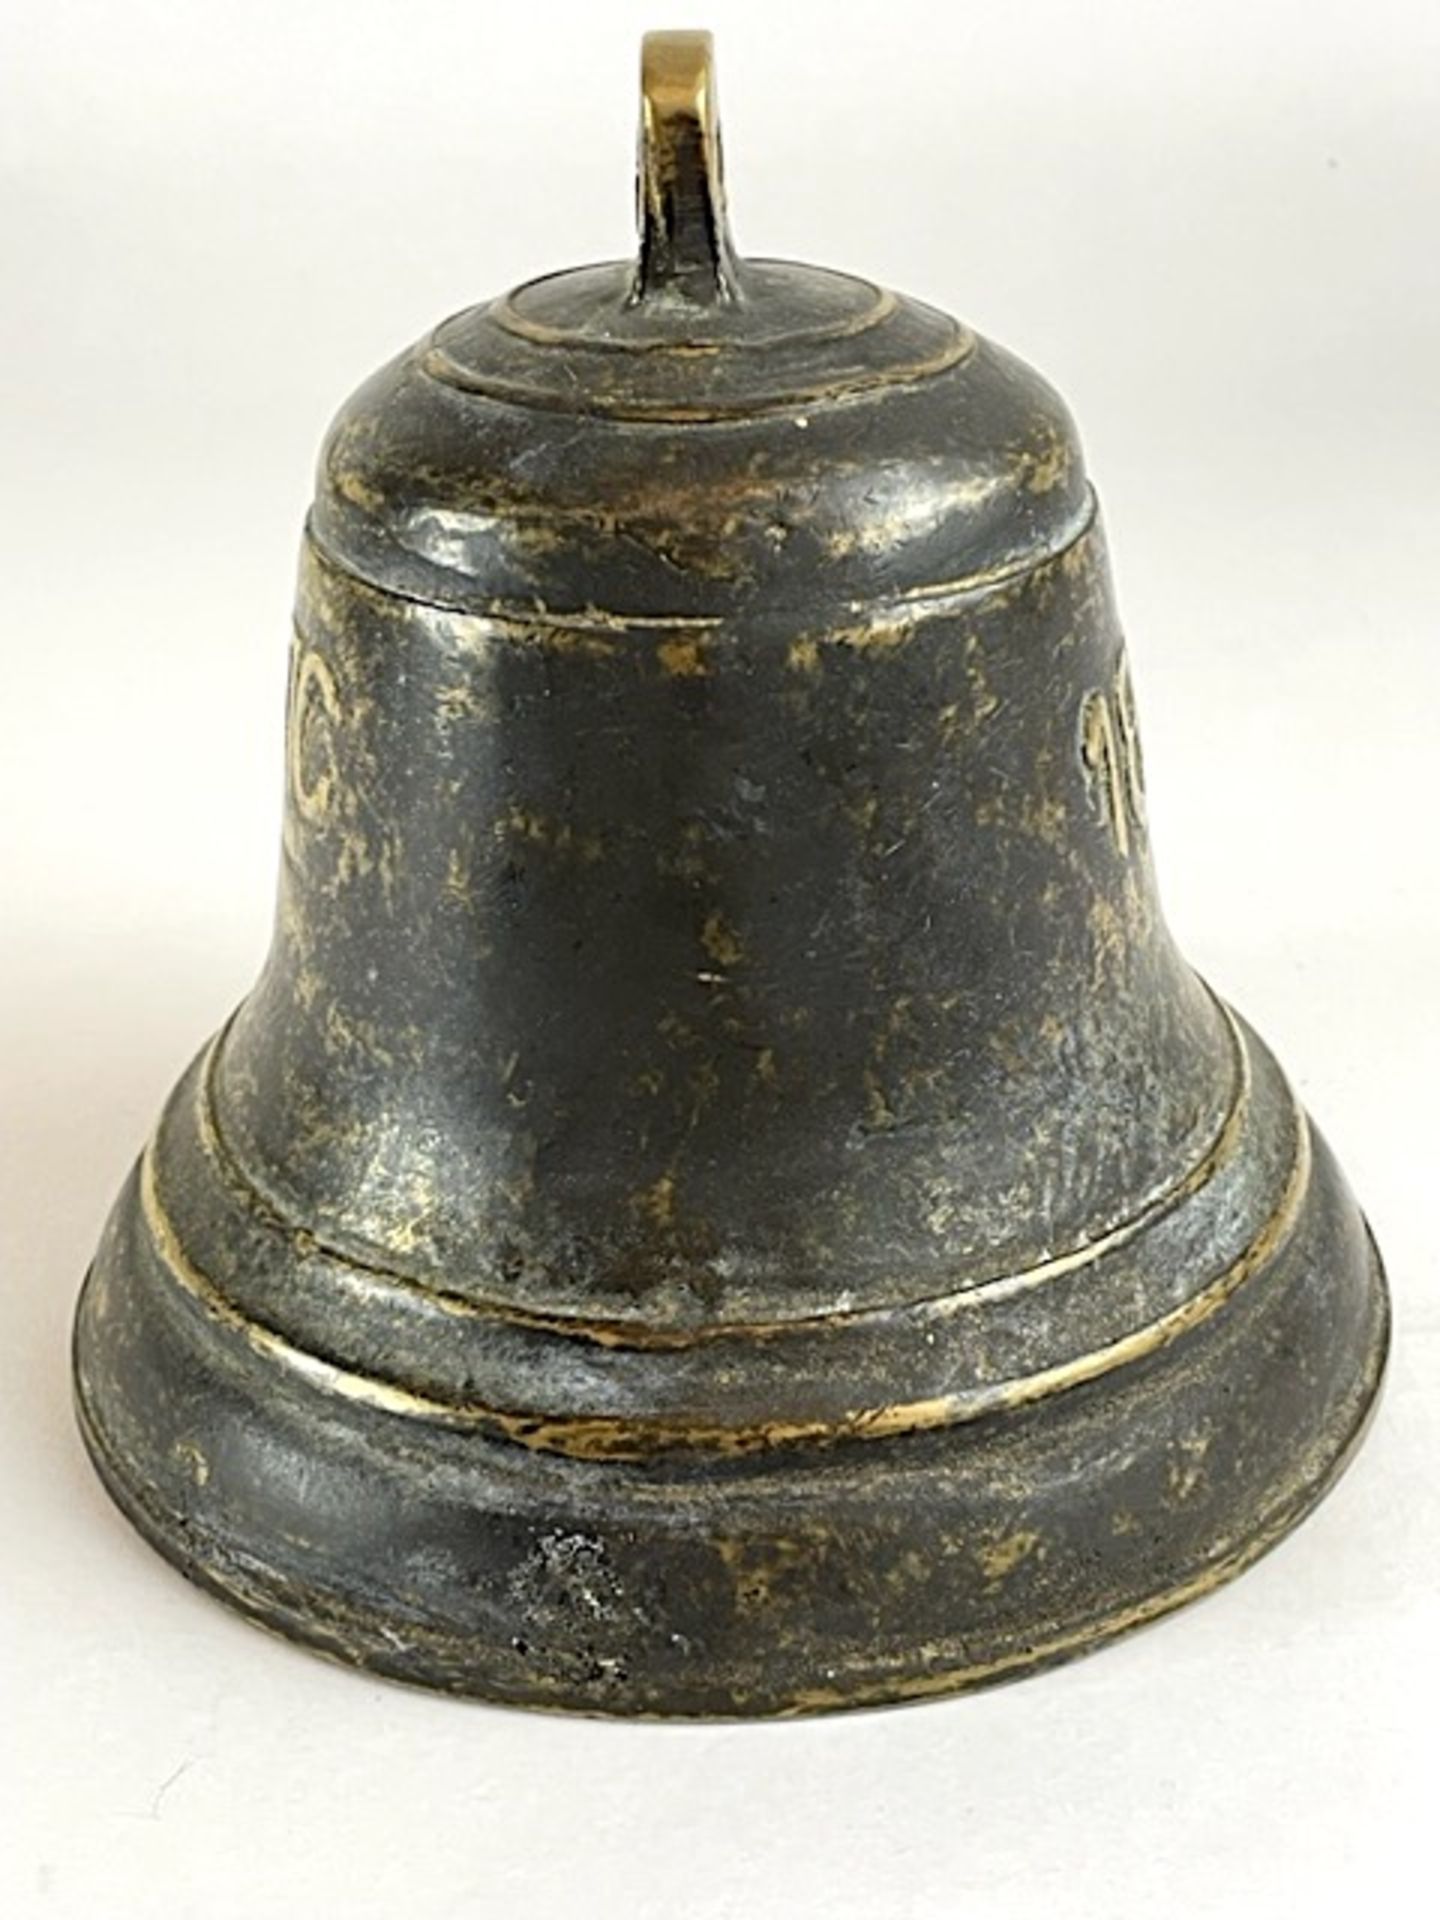 Ship's bell - Image 5 of 11